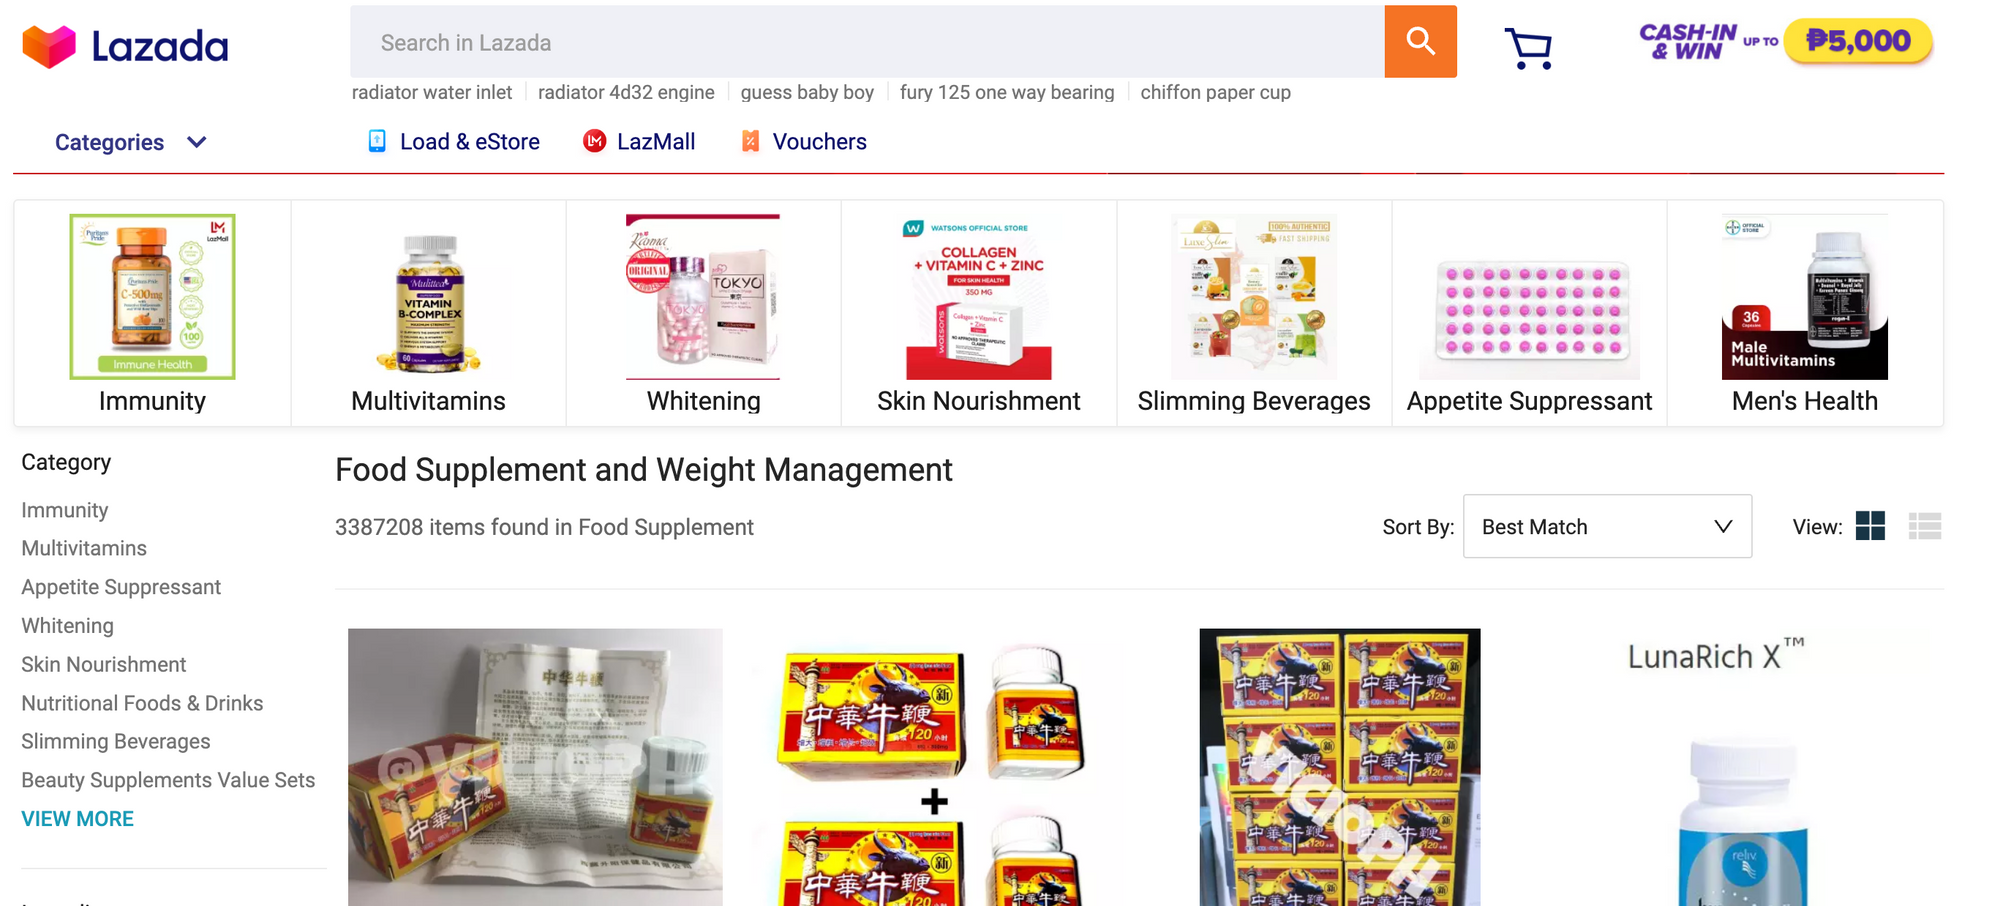 What can you sell on Lazada in 2022 to get the best profits?